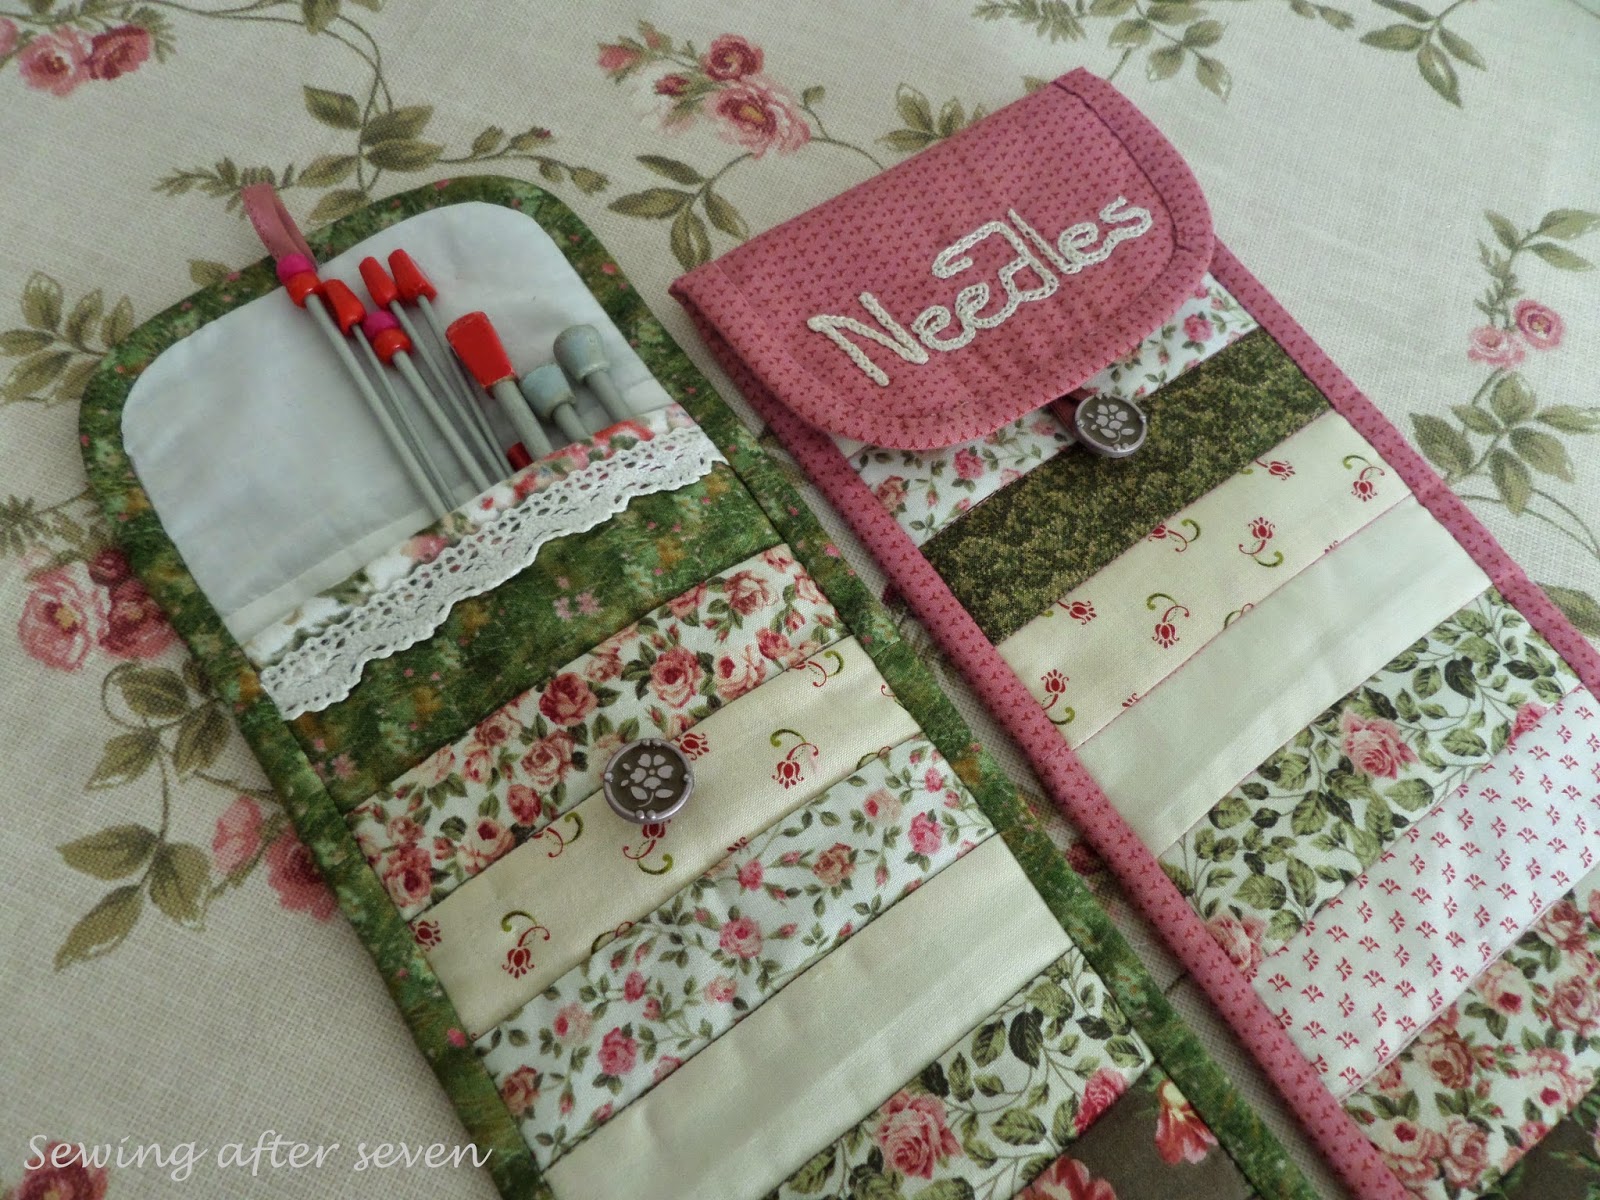 Sewing After Seven: Using up scraps